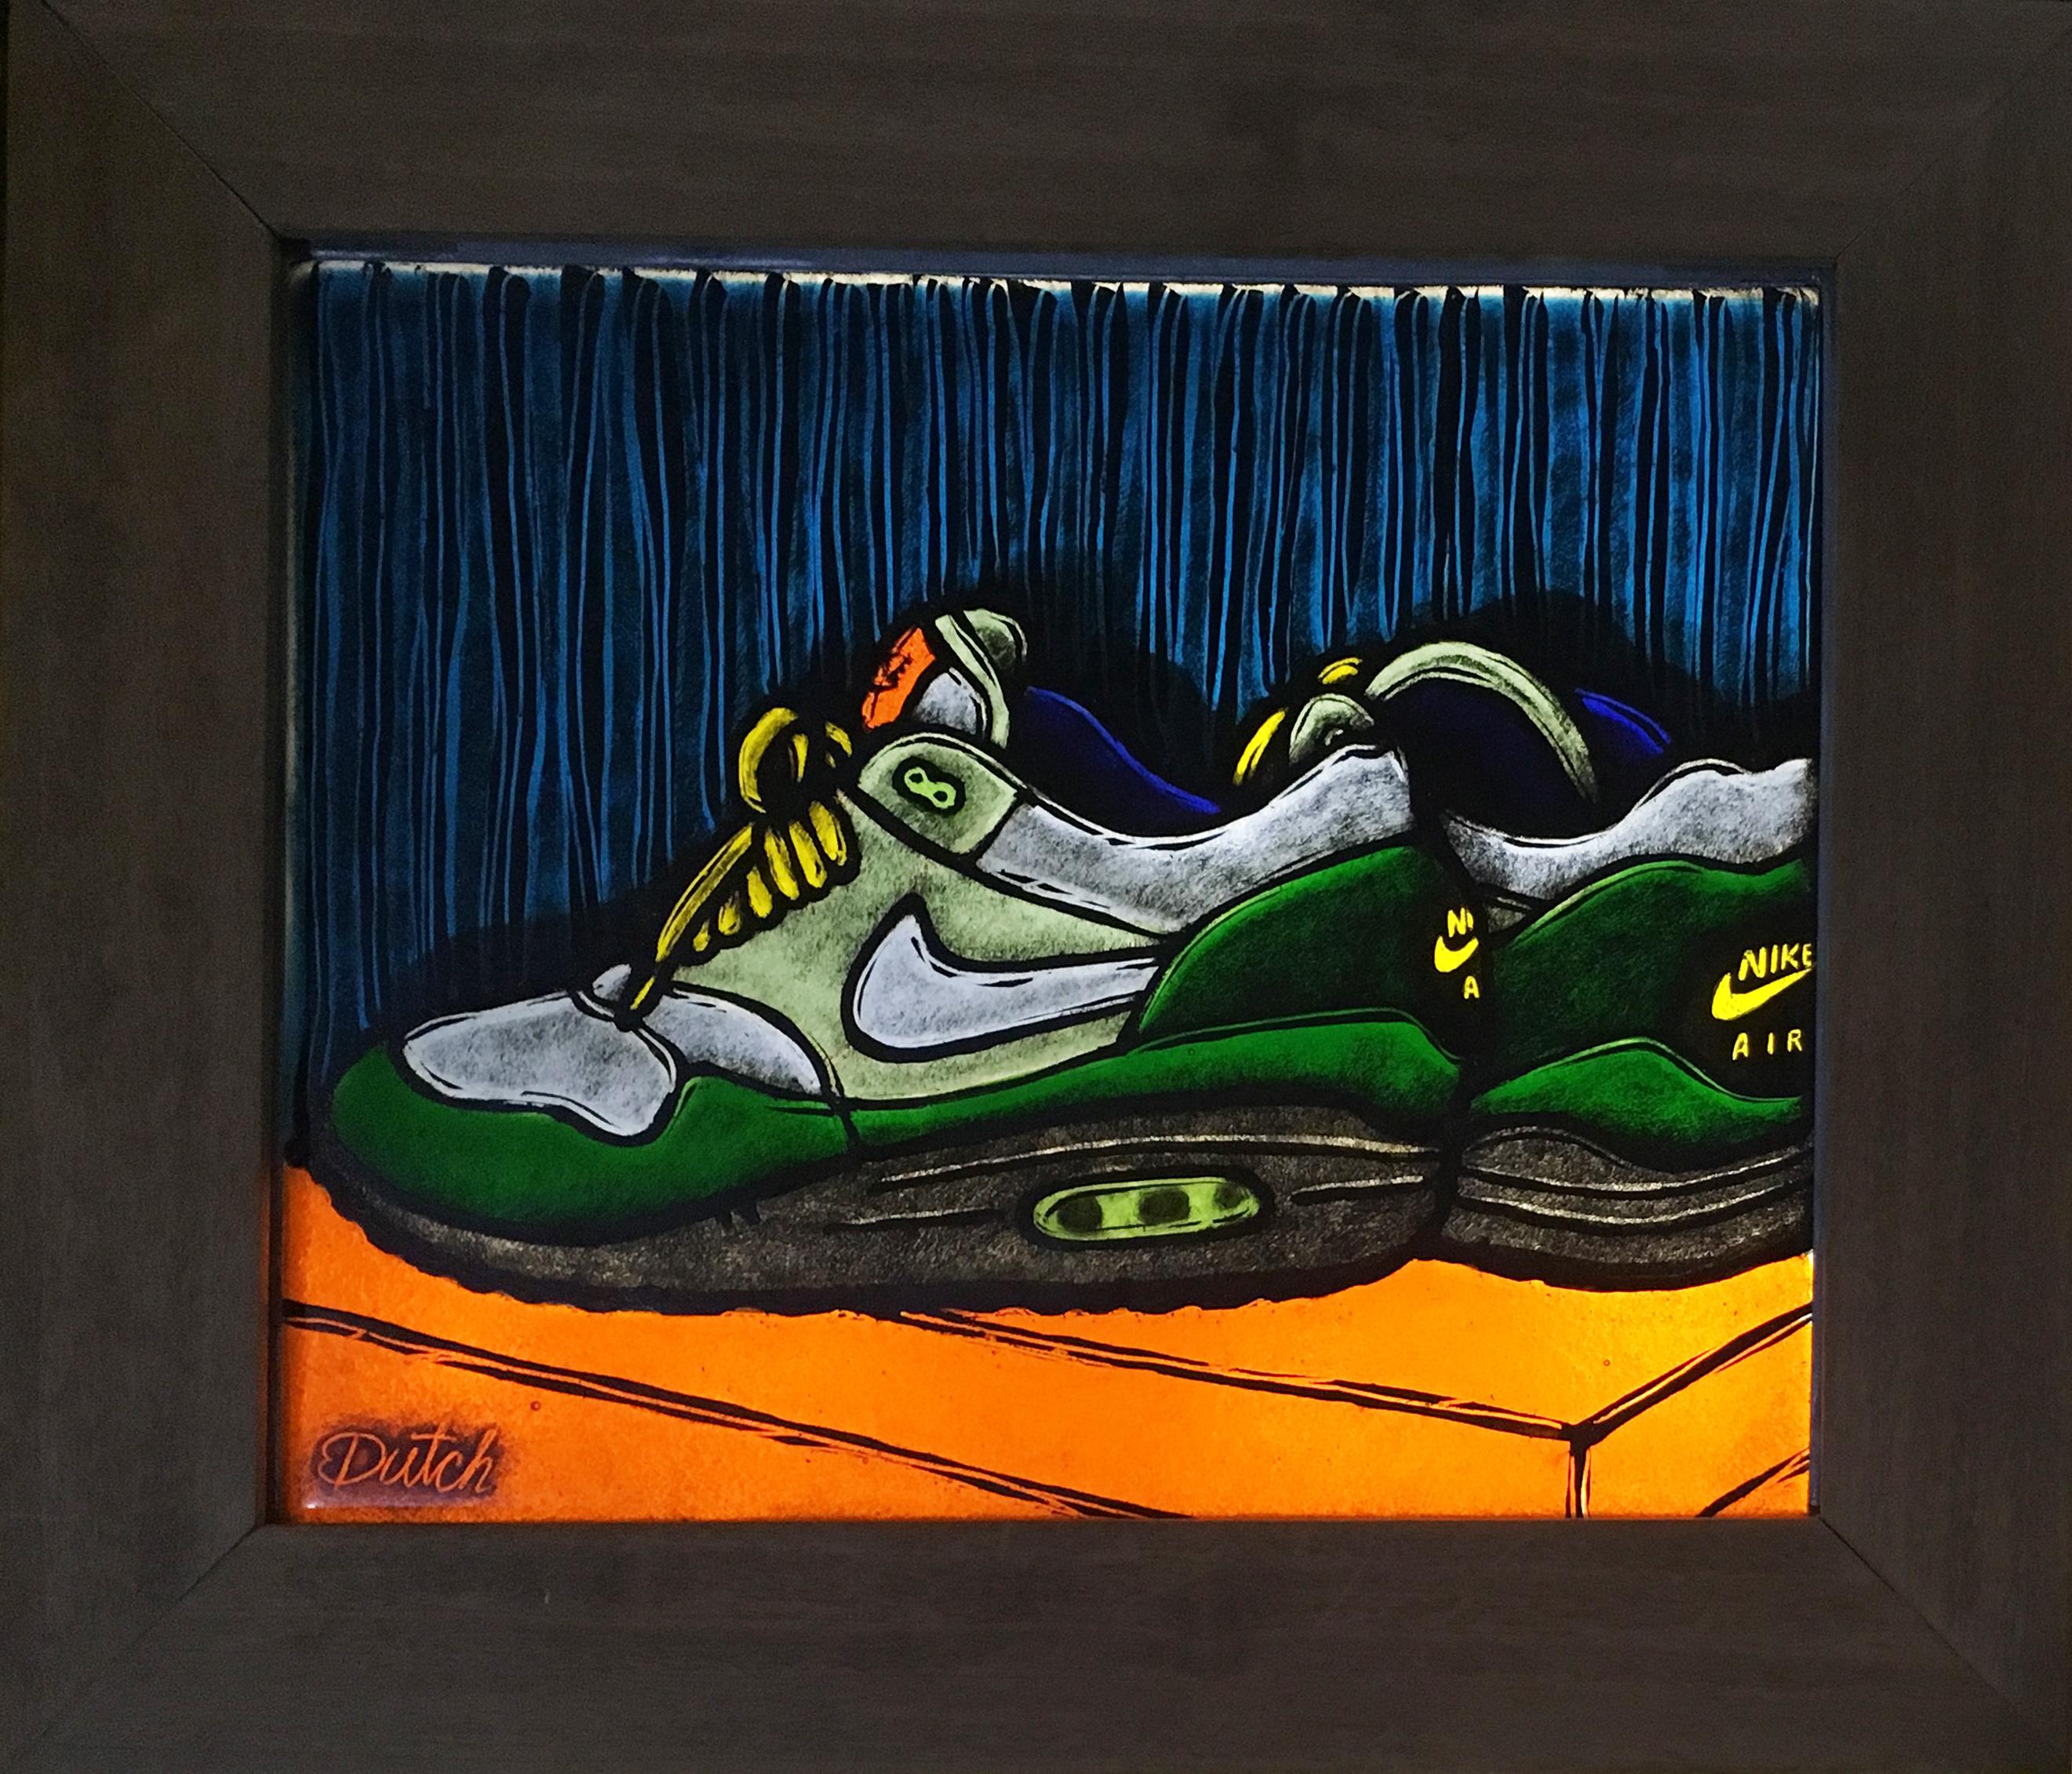 Air Max, 2016, fused glass, Nike, green, orange, sneaker, blue, frame, window - Painting by TF Dutchman